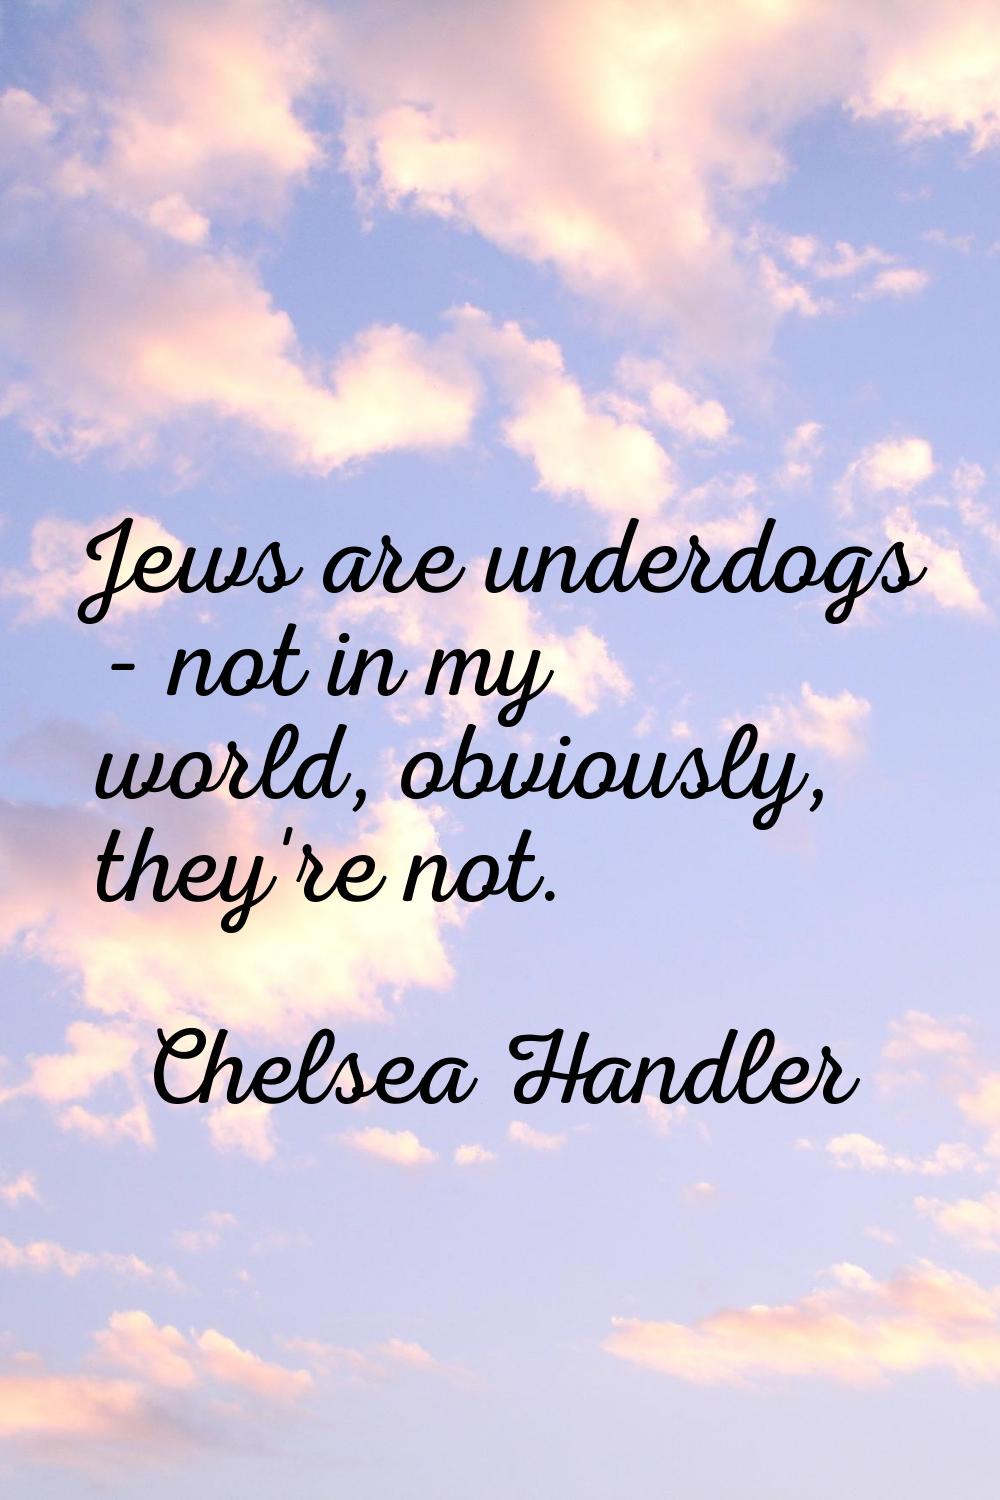 Jews are underdogs - not in my world, obviously, they're not.